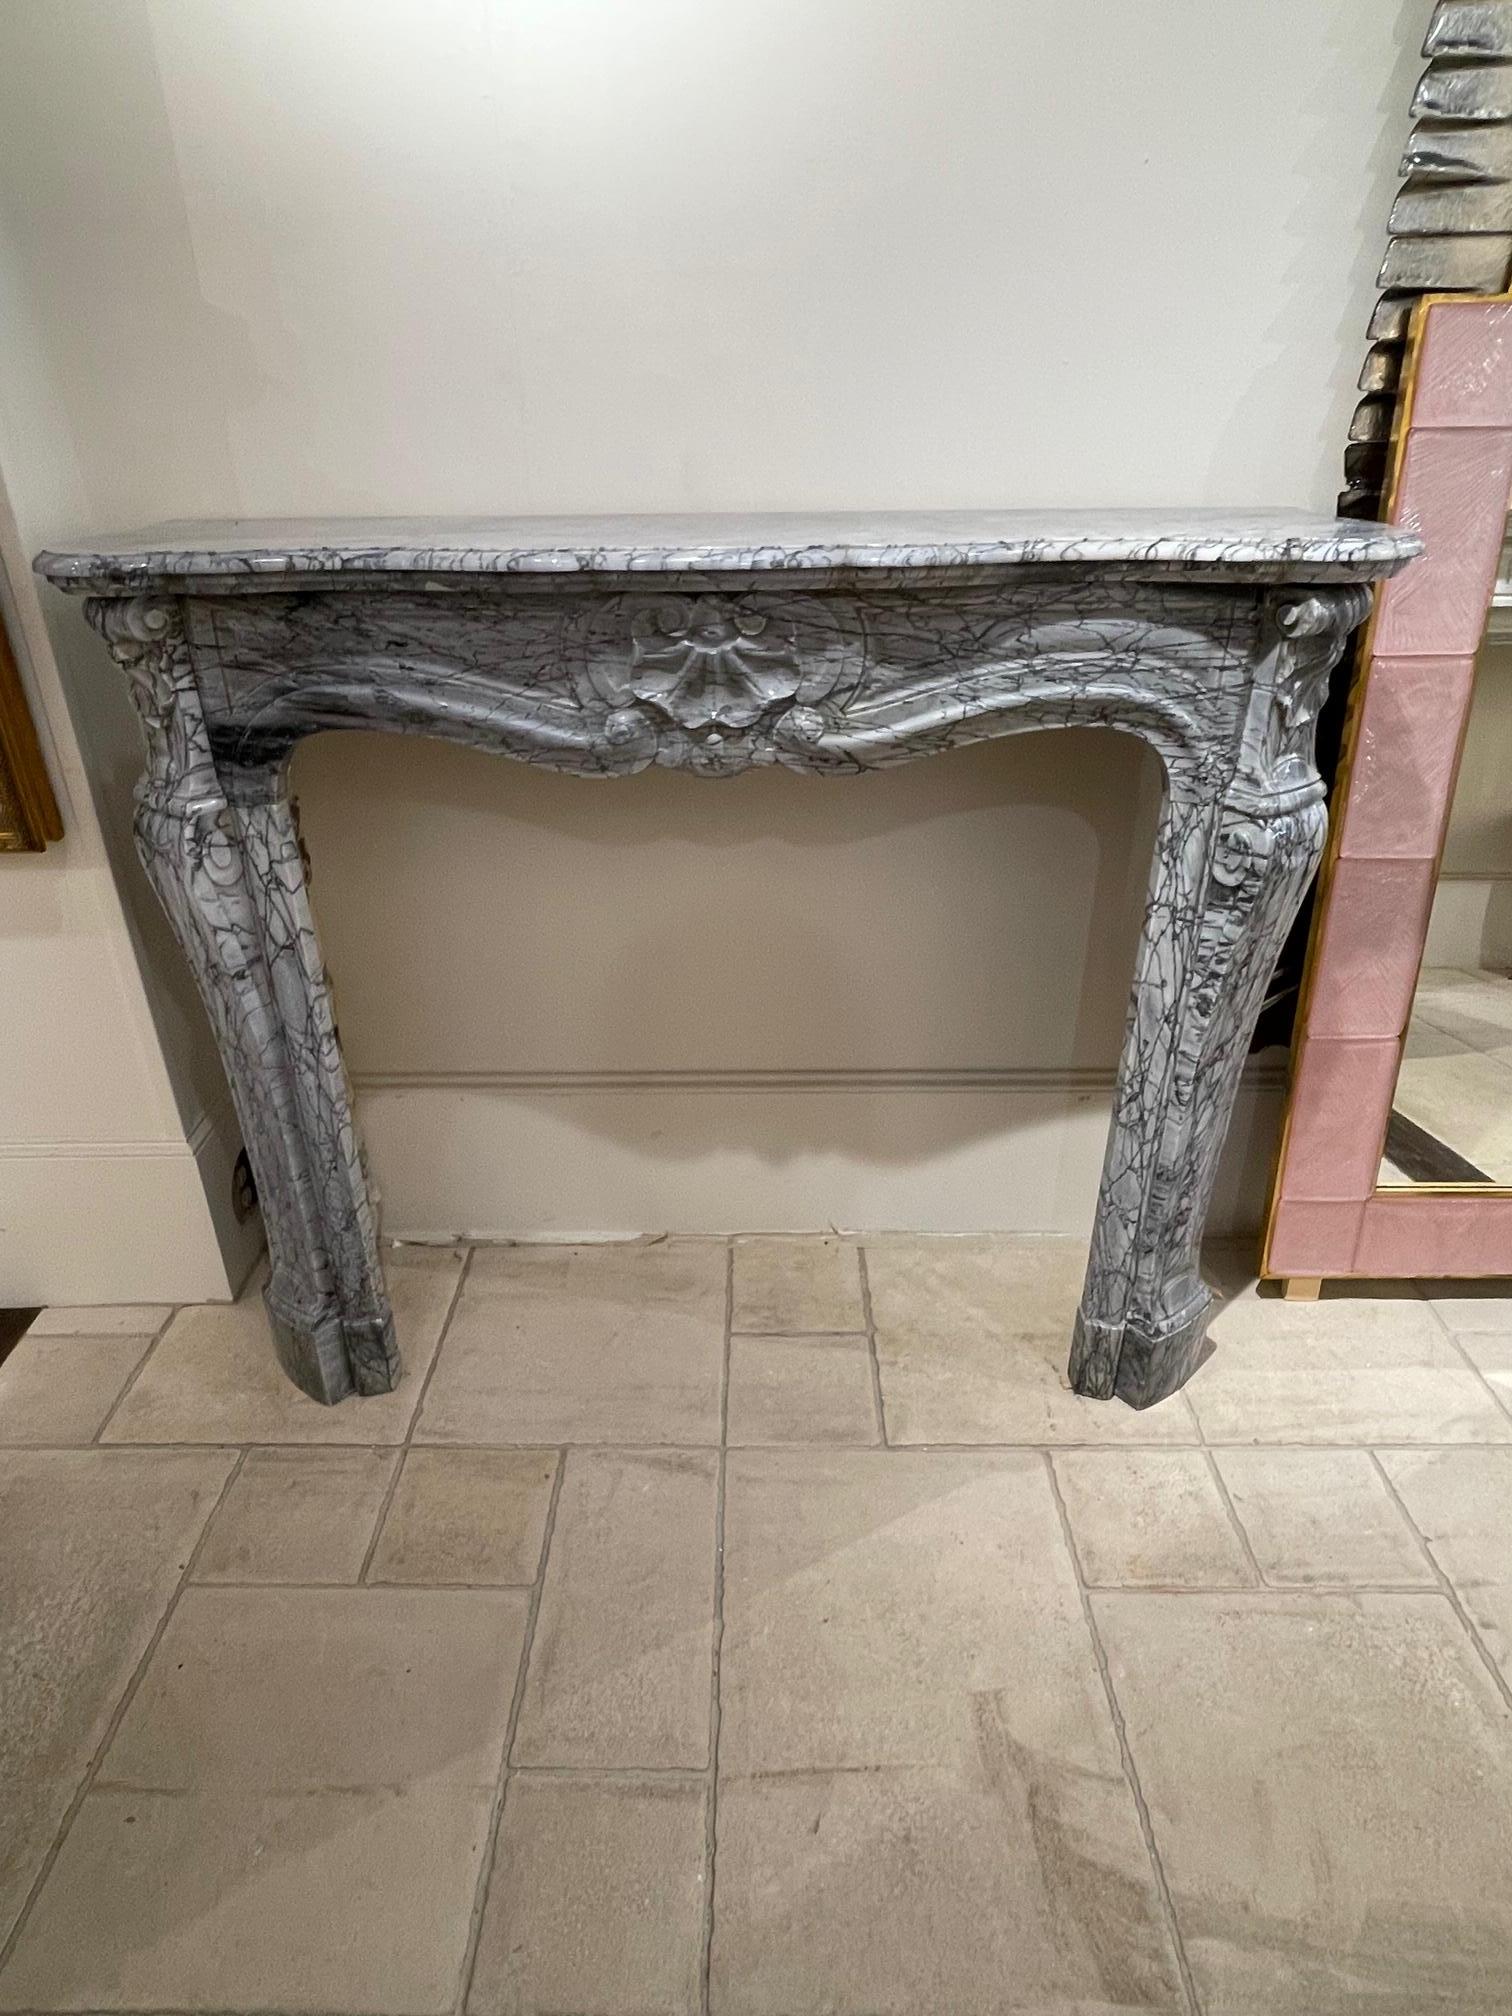 Extraordinary 19th century French Bleu Turquin Louis XV style carved marble mantel. Decorative carvings and exceptional veining on this piece. A true work of art that provides an extremely elegant touch!